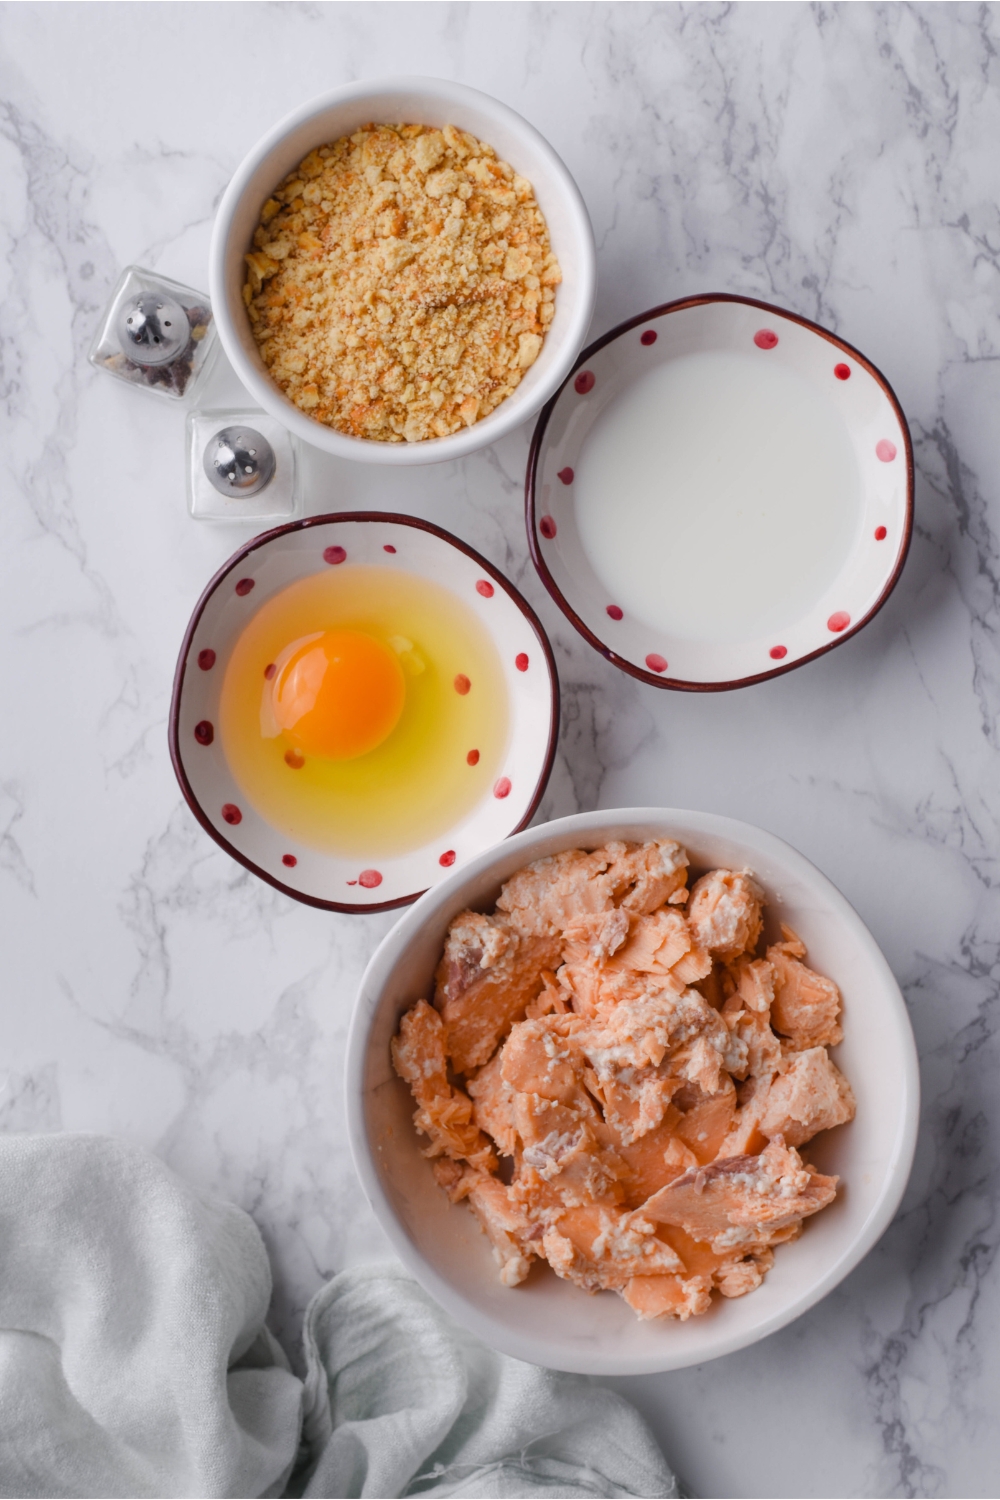 Overhead view of an assortment of ingredients including bowls of canned salmon, an egg, milk, cracker crumbs, and mini salt and pepper shakers.